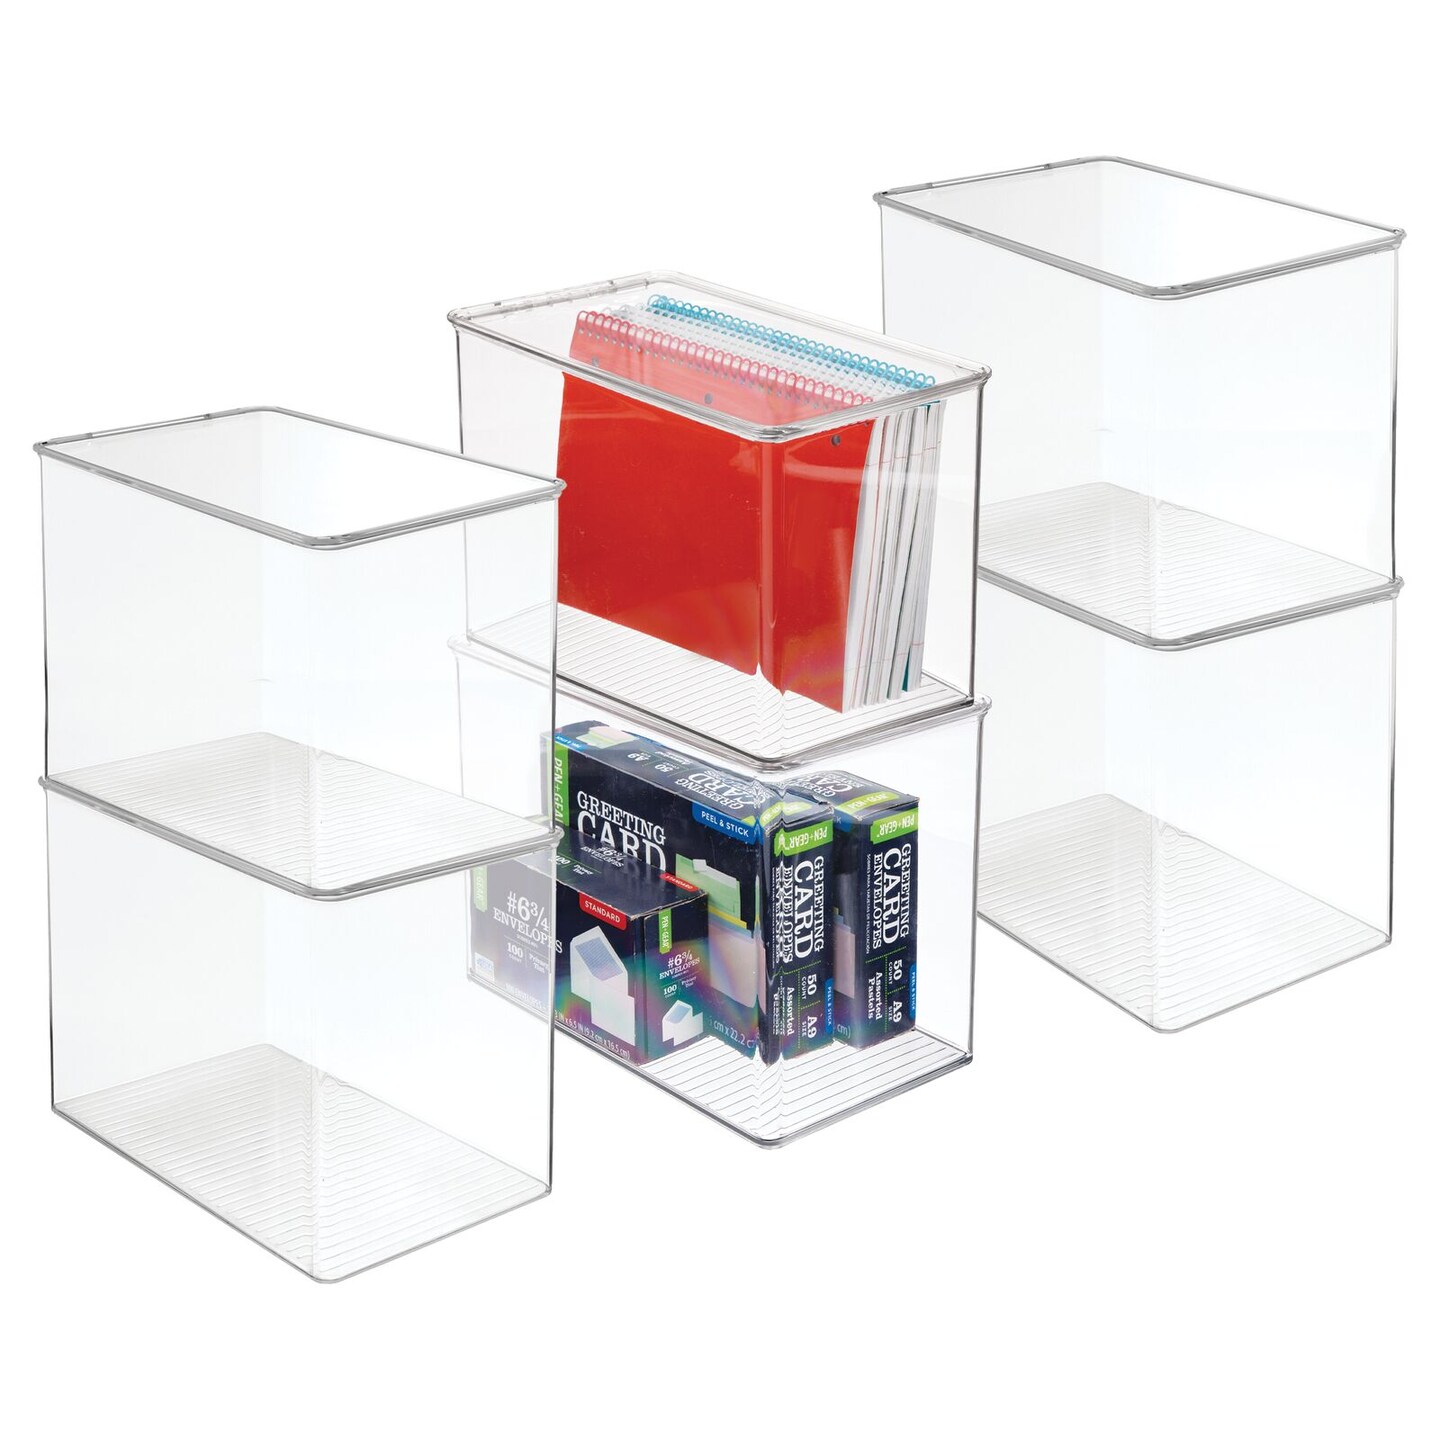 mDesign Plastic Stackable Office Storage Box with Hinge Lid, 6 Pack - Clear